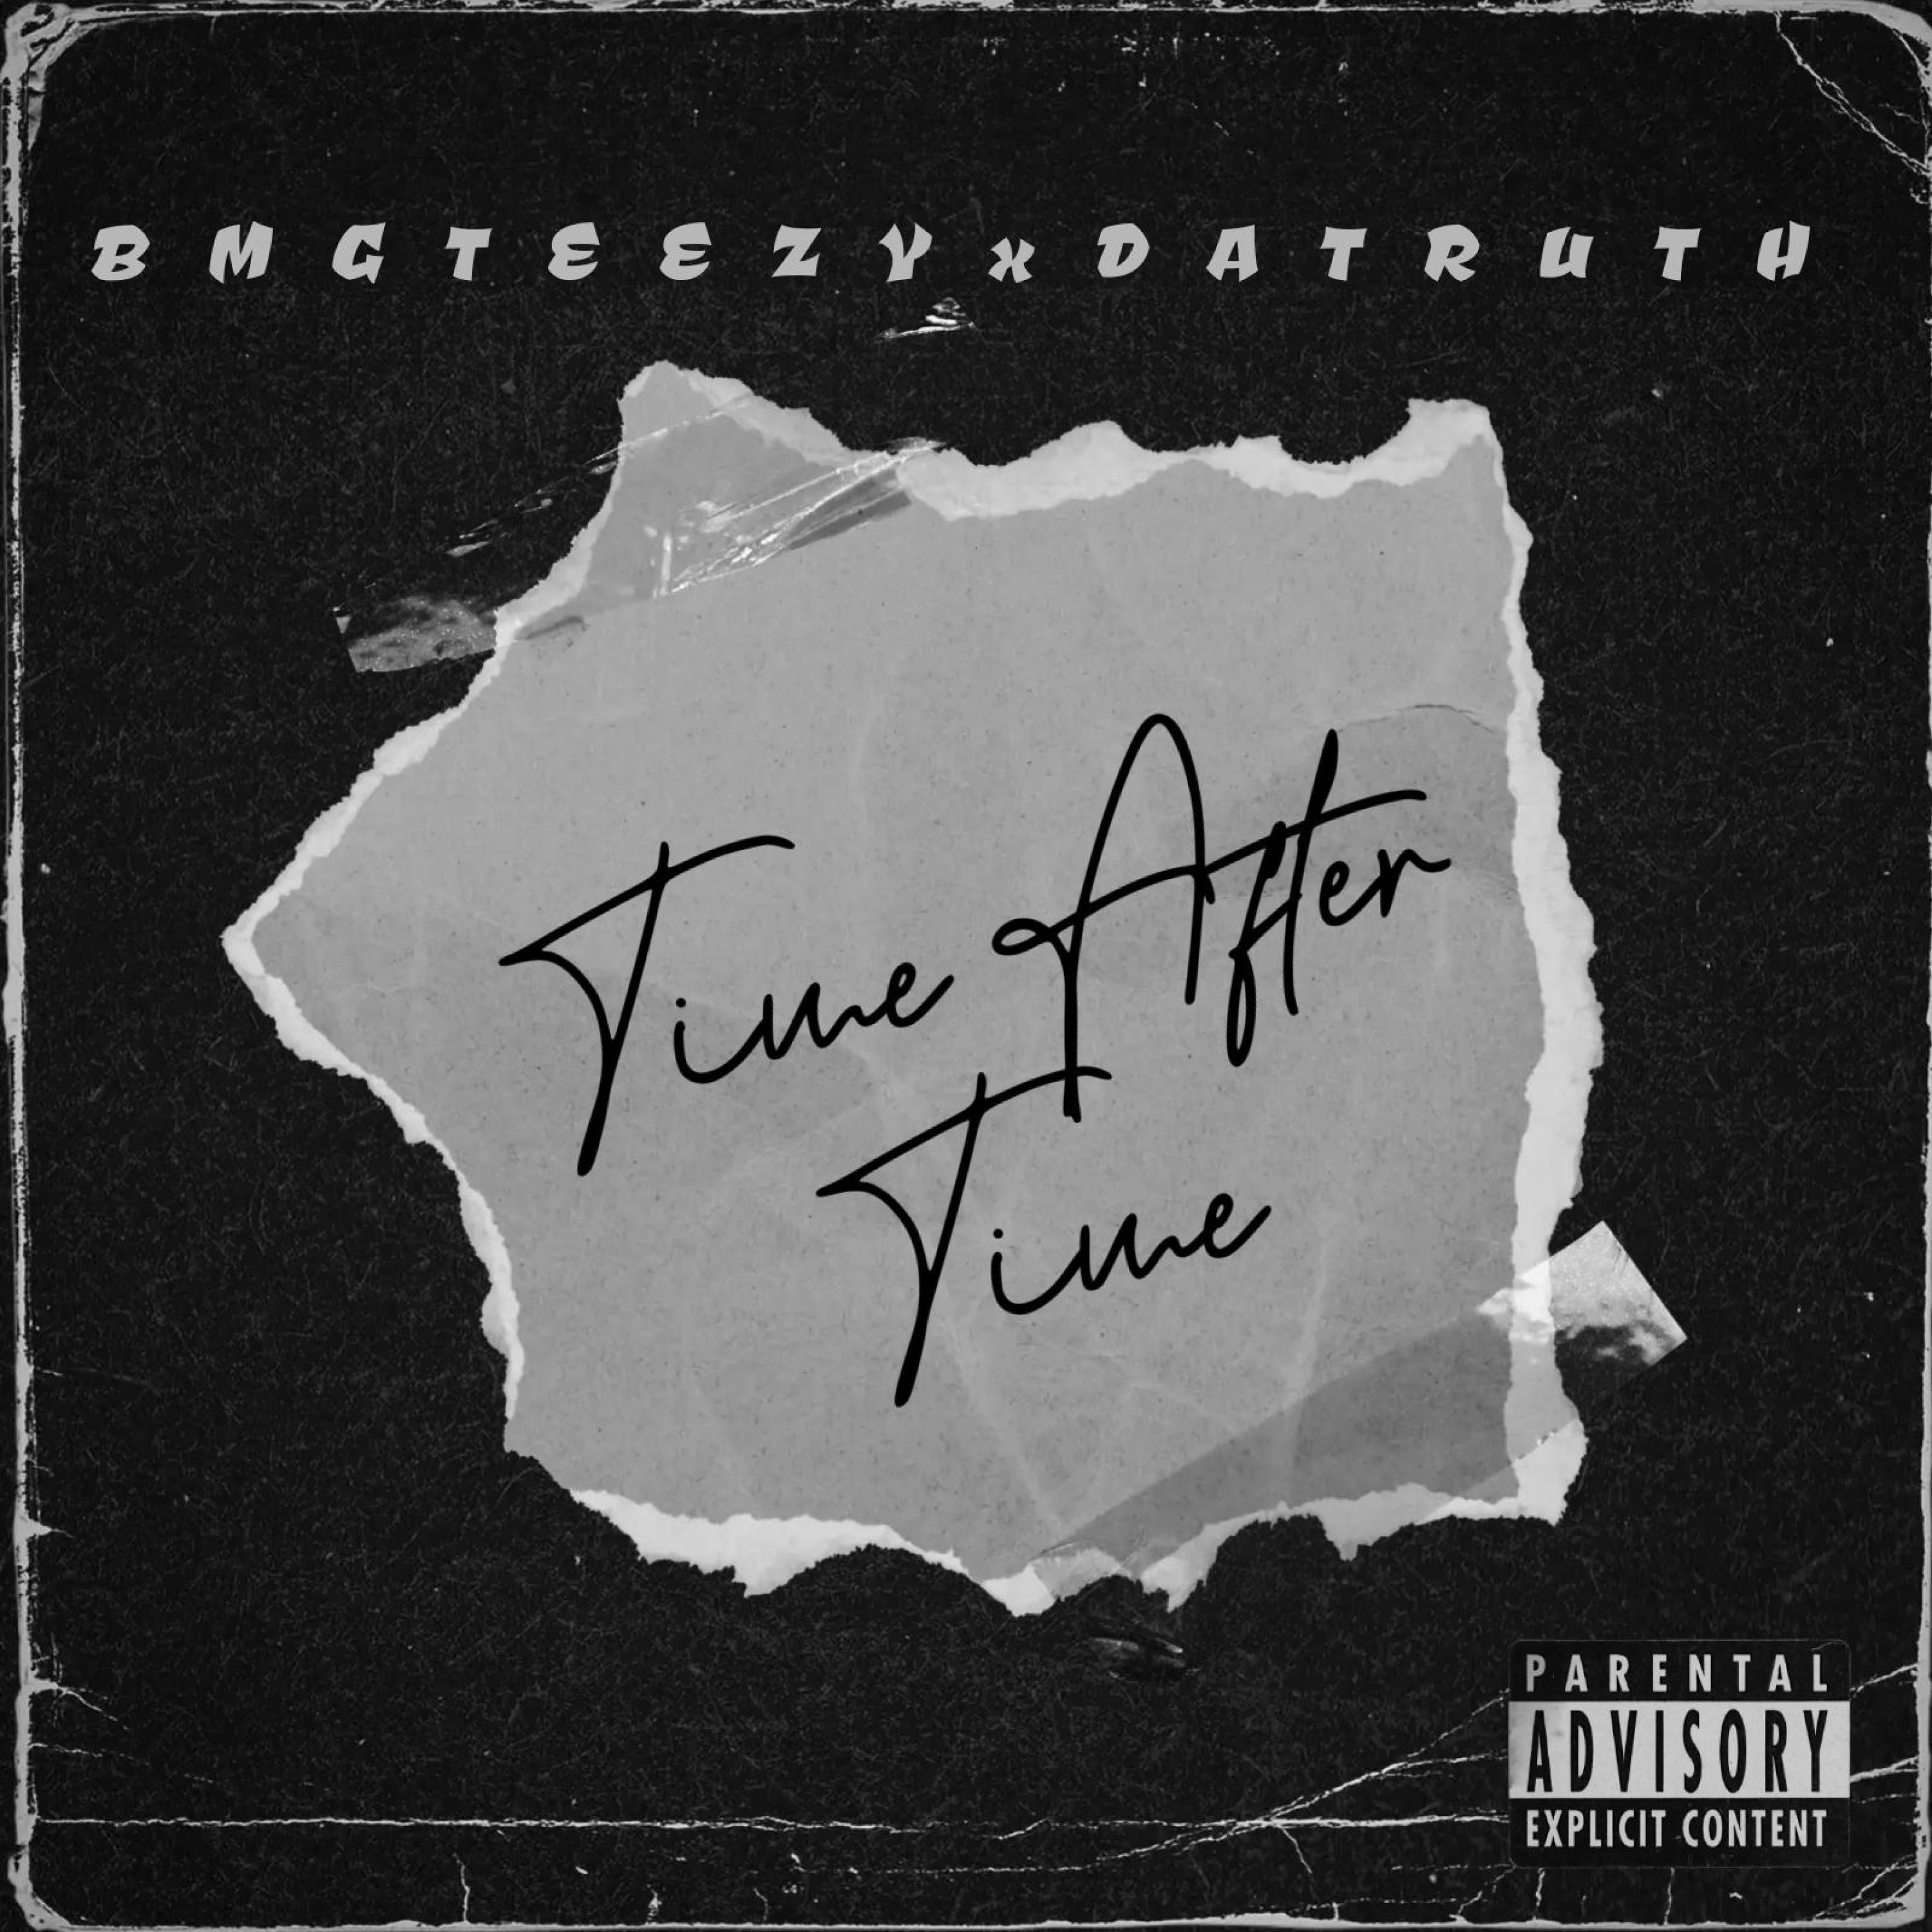 ZaycovenDaTruth - Time After Time (feat. BMG TEEZY)